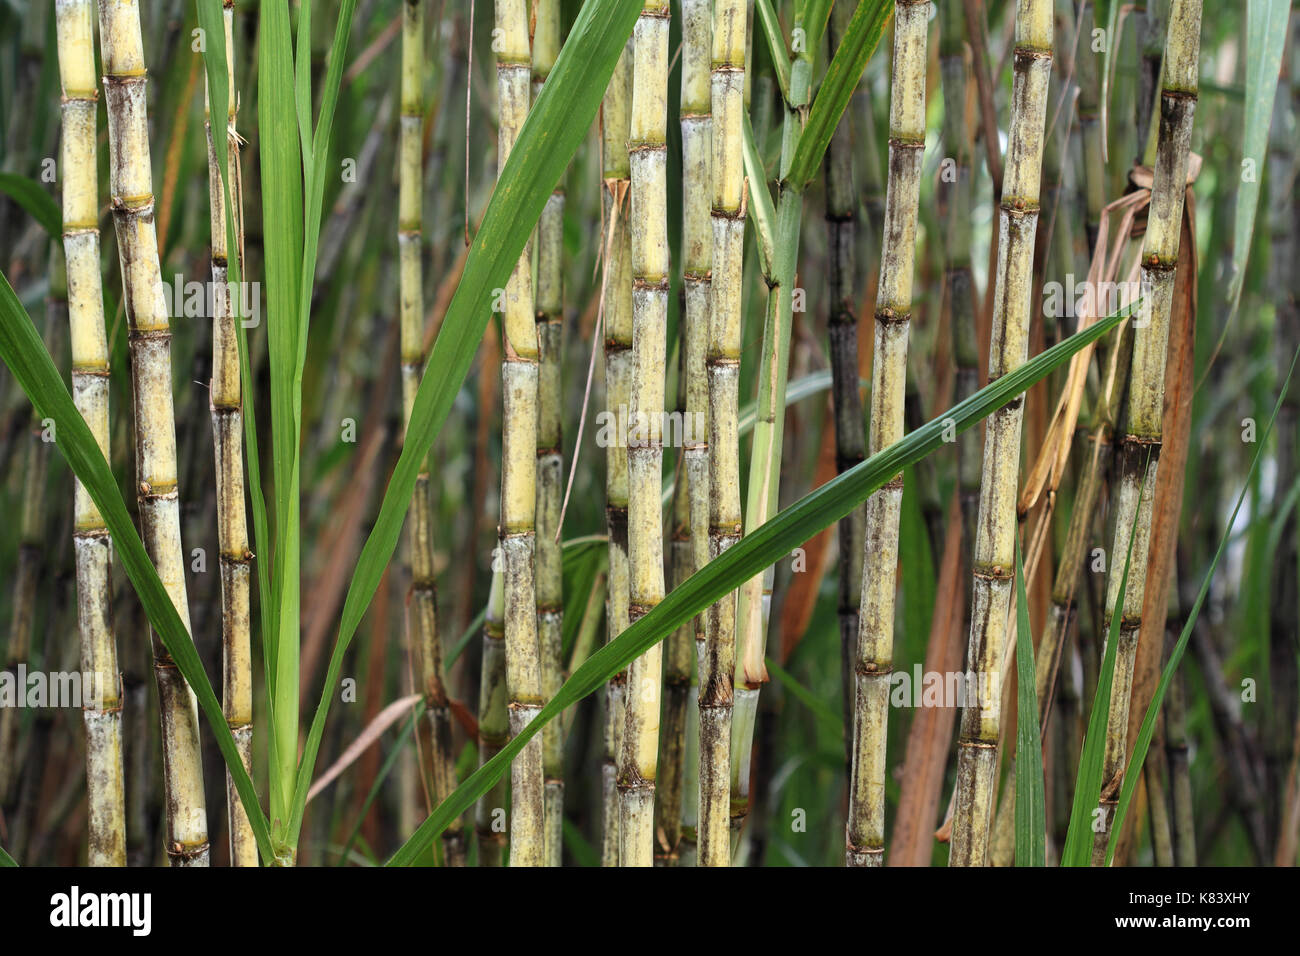 Closeup of sugar cane plant, saccharum officinarum, used for sugar production and ethanol Stock Photo